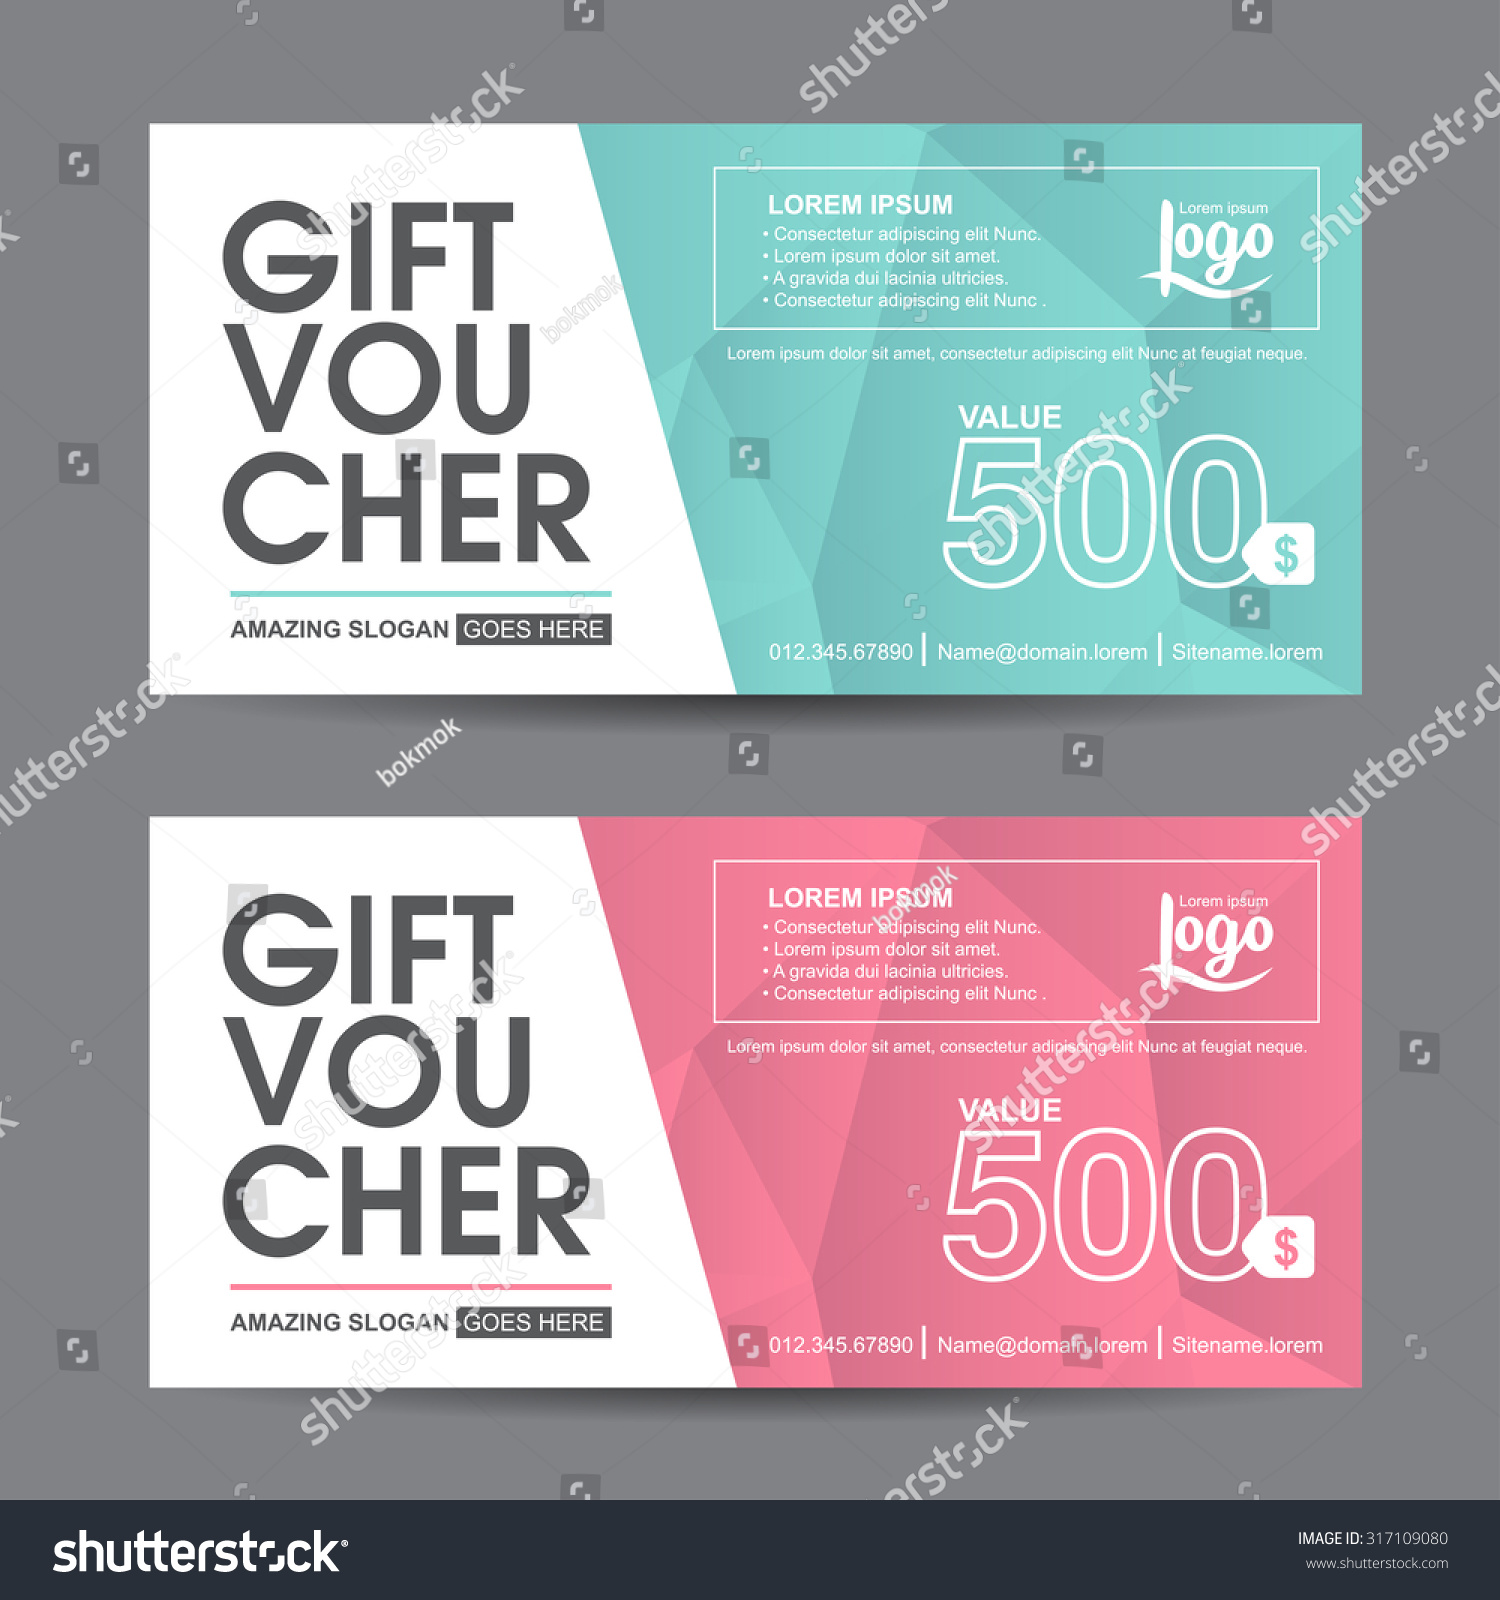 Gift Voucher Template Colorful Patterncute Gift Stock Vector With Gift Certificate Log Template